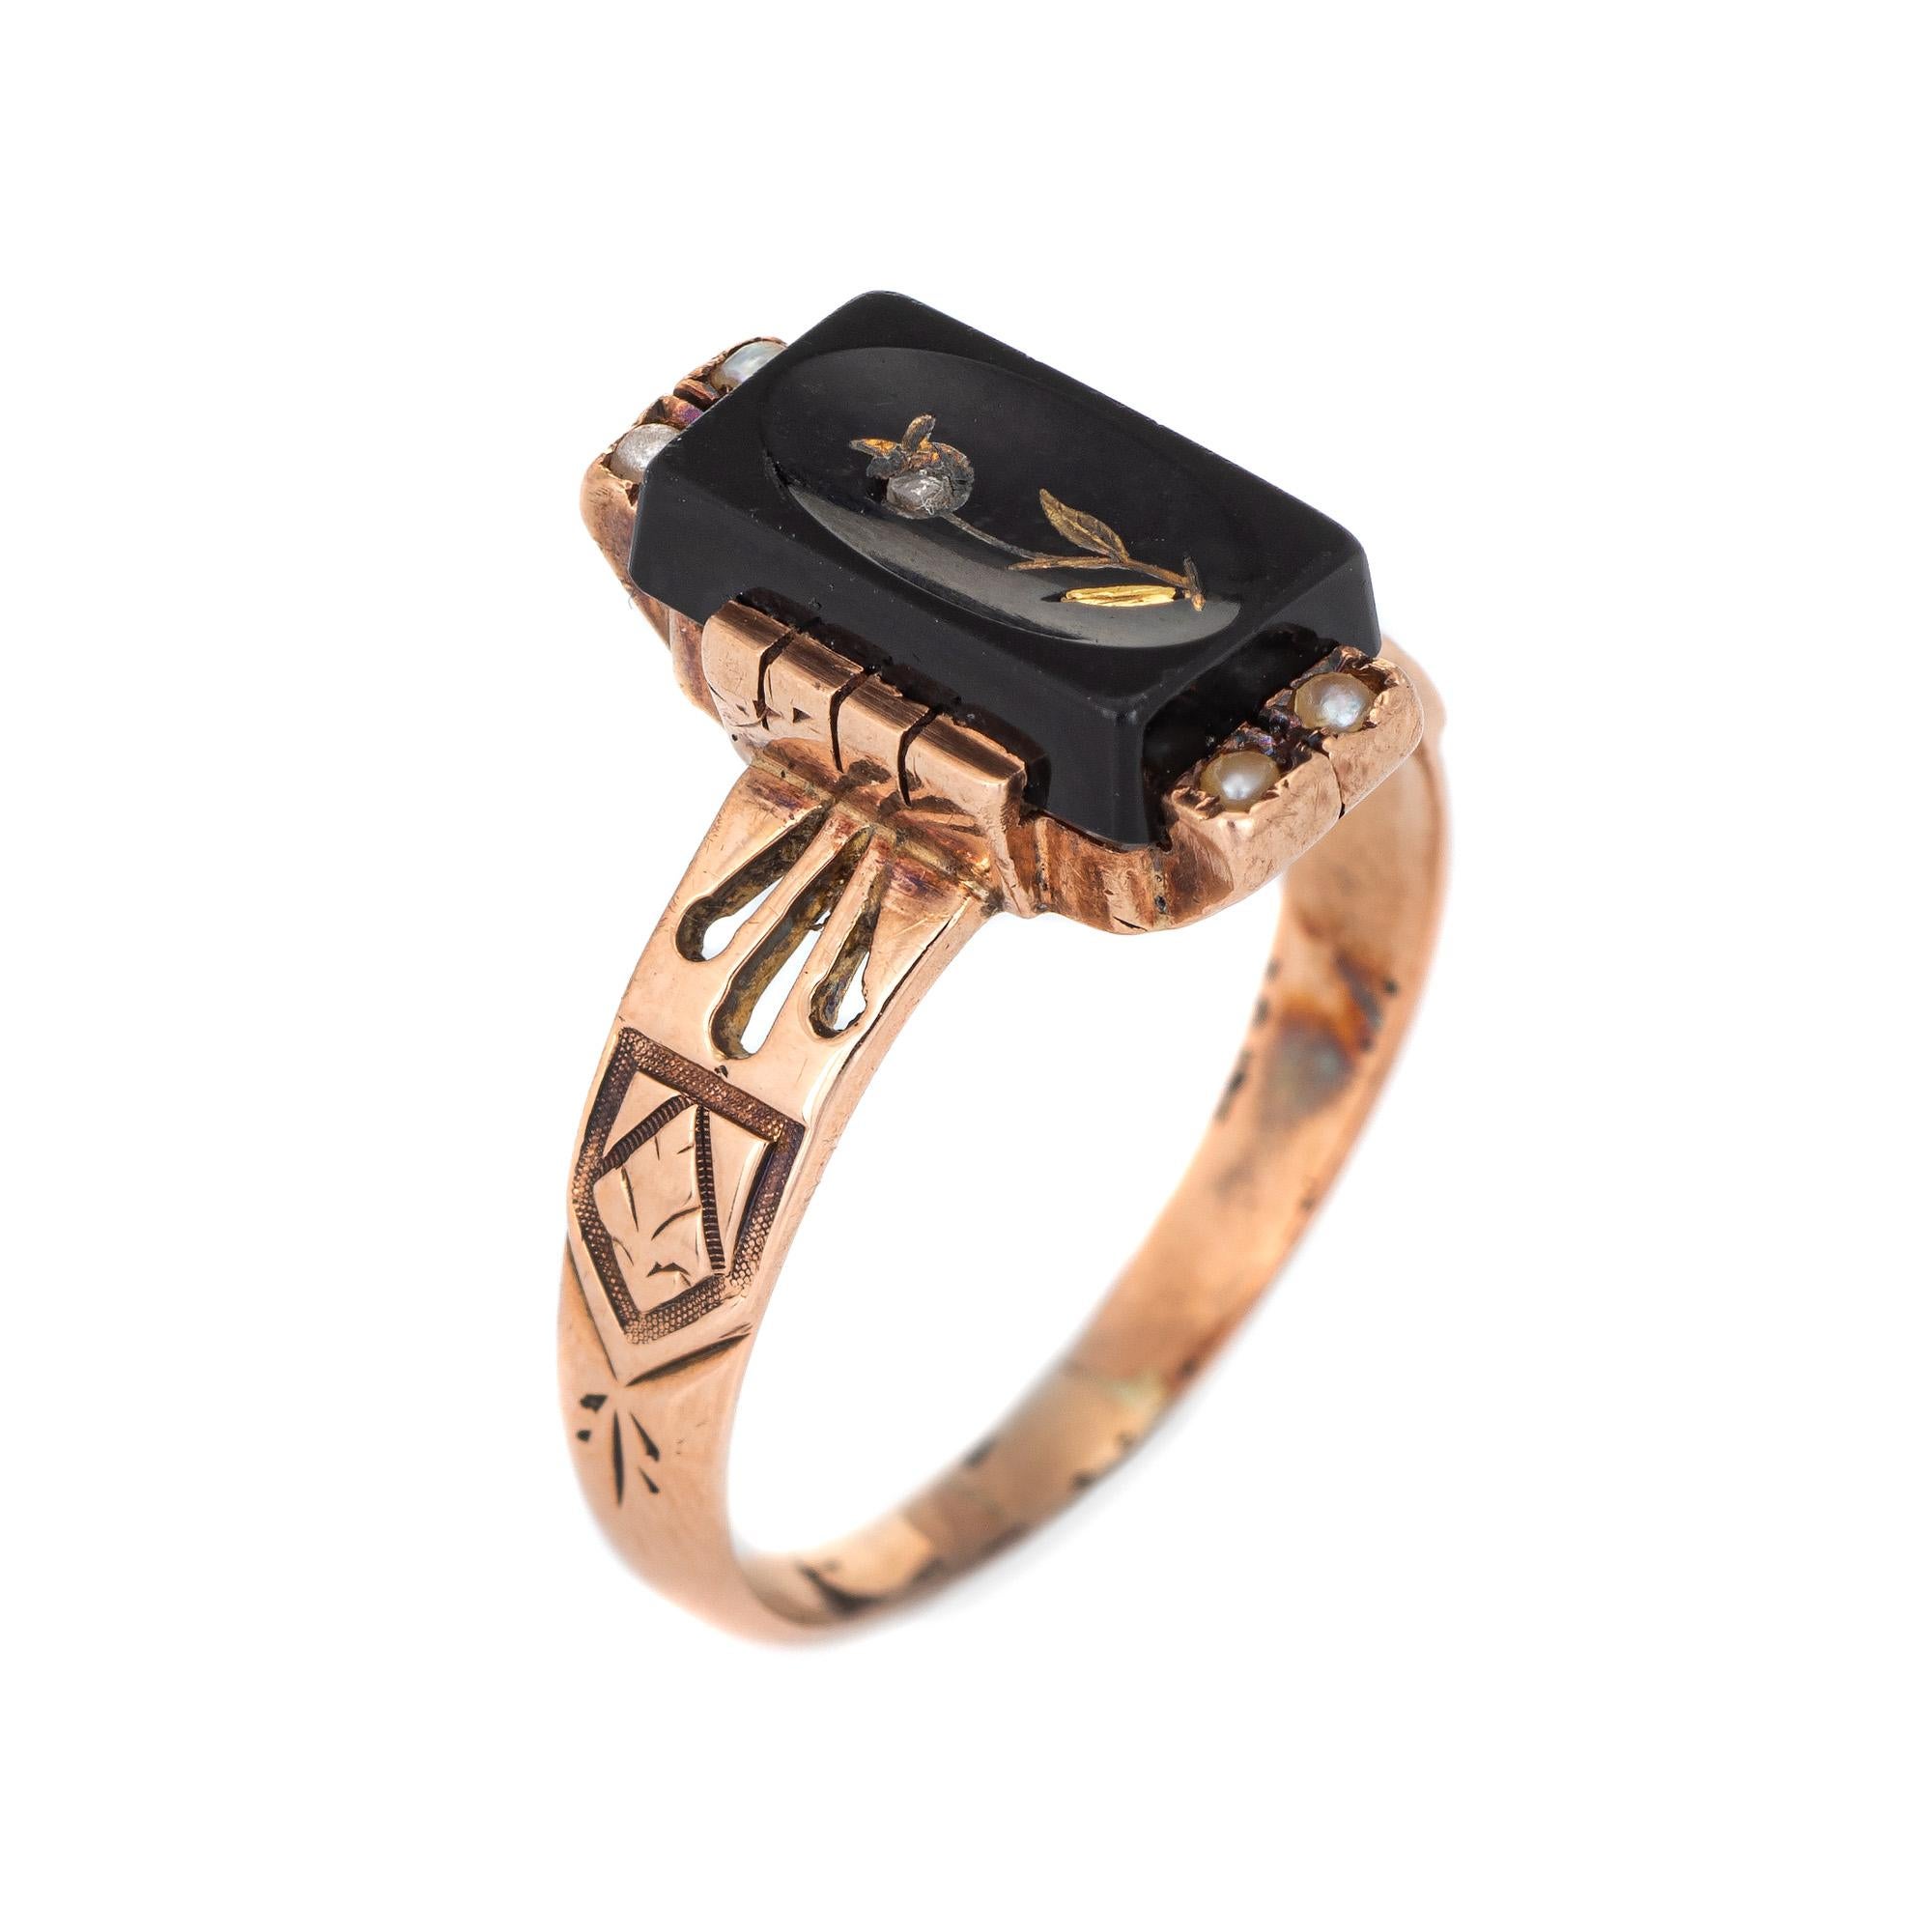 Finely detailed antique Victorian ring (circa 1880s to 1900s) crafted in 10 karat rose gold. 

One estimated 0.01 carat rose cut diamond is set into the mount with four 1mm seed pearls set into both ends of the onyx. The onyx measures 10mm x